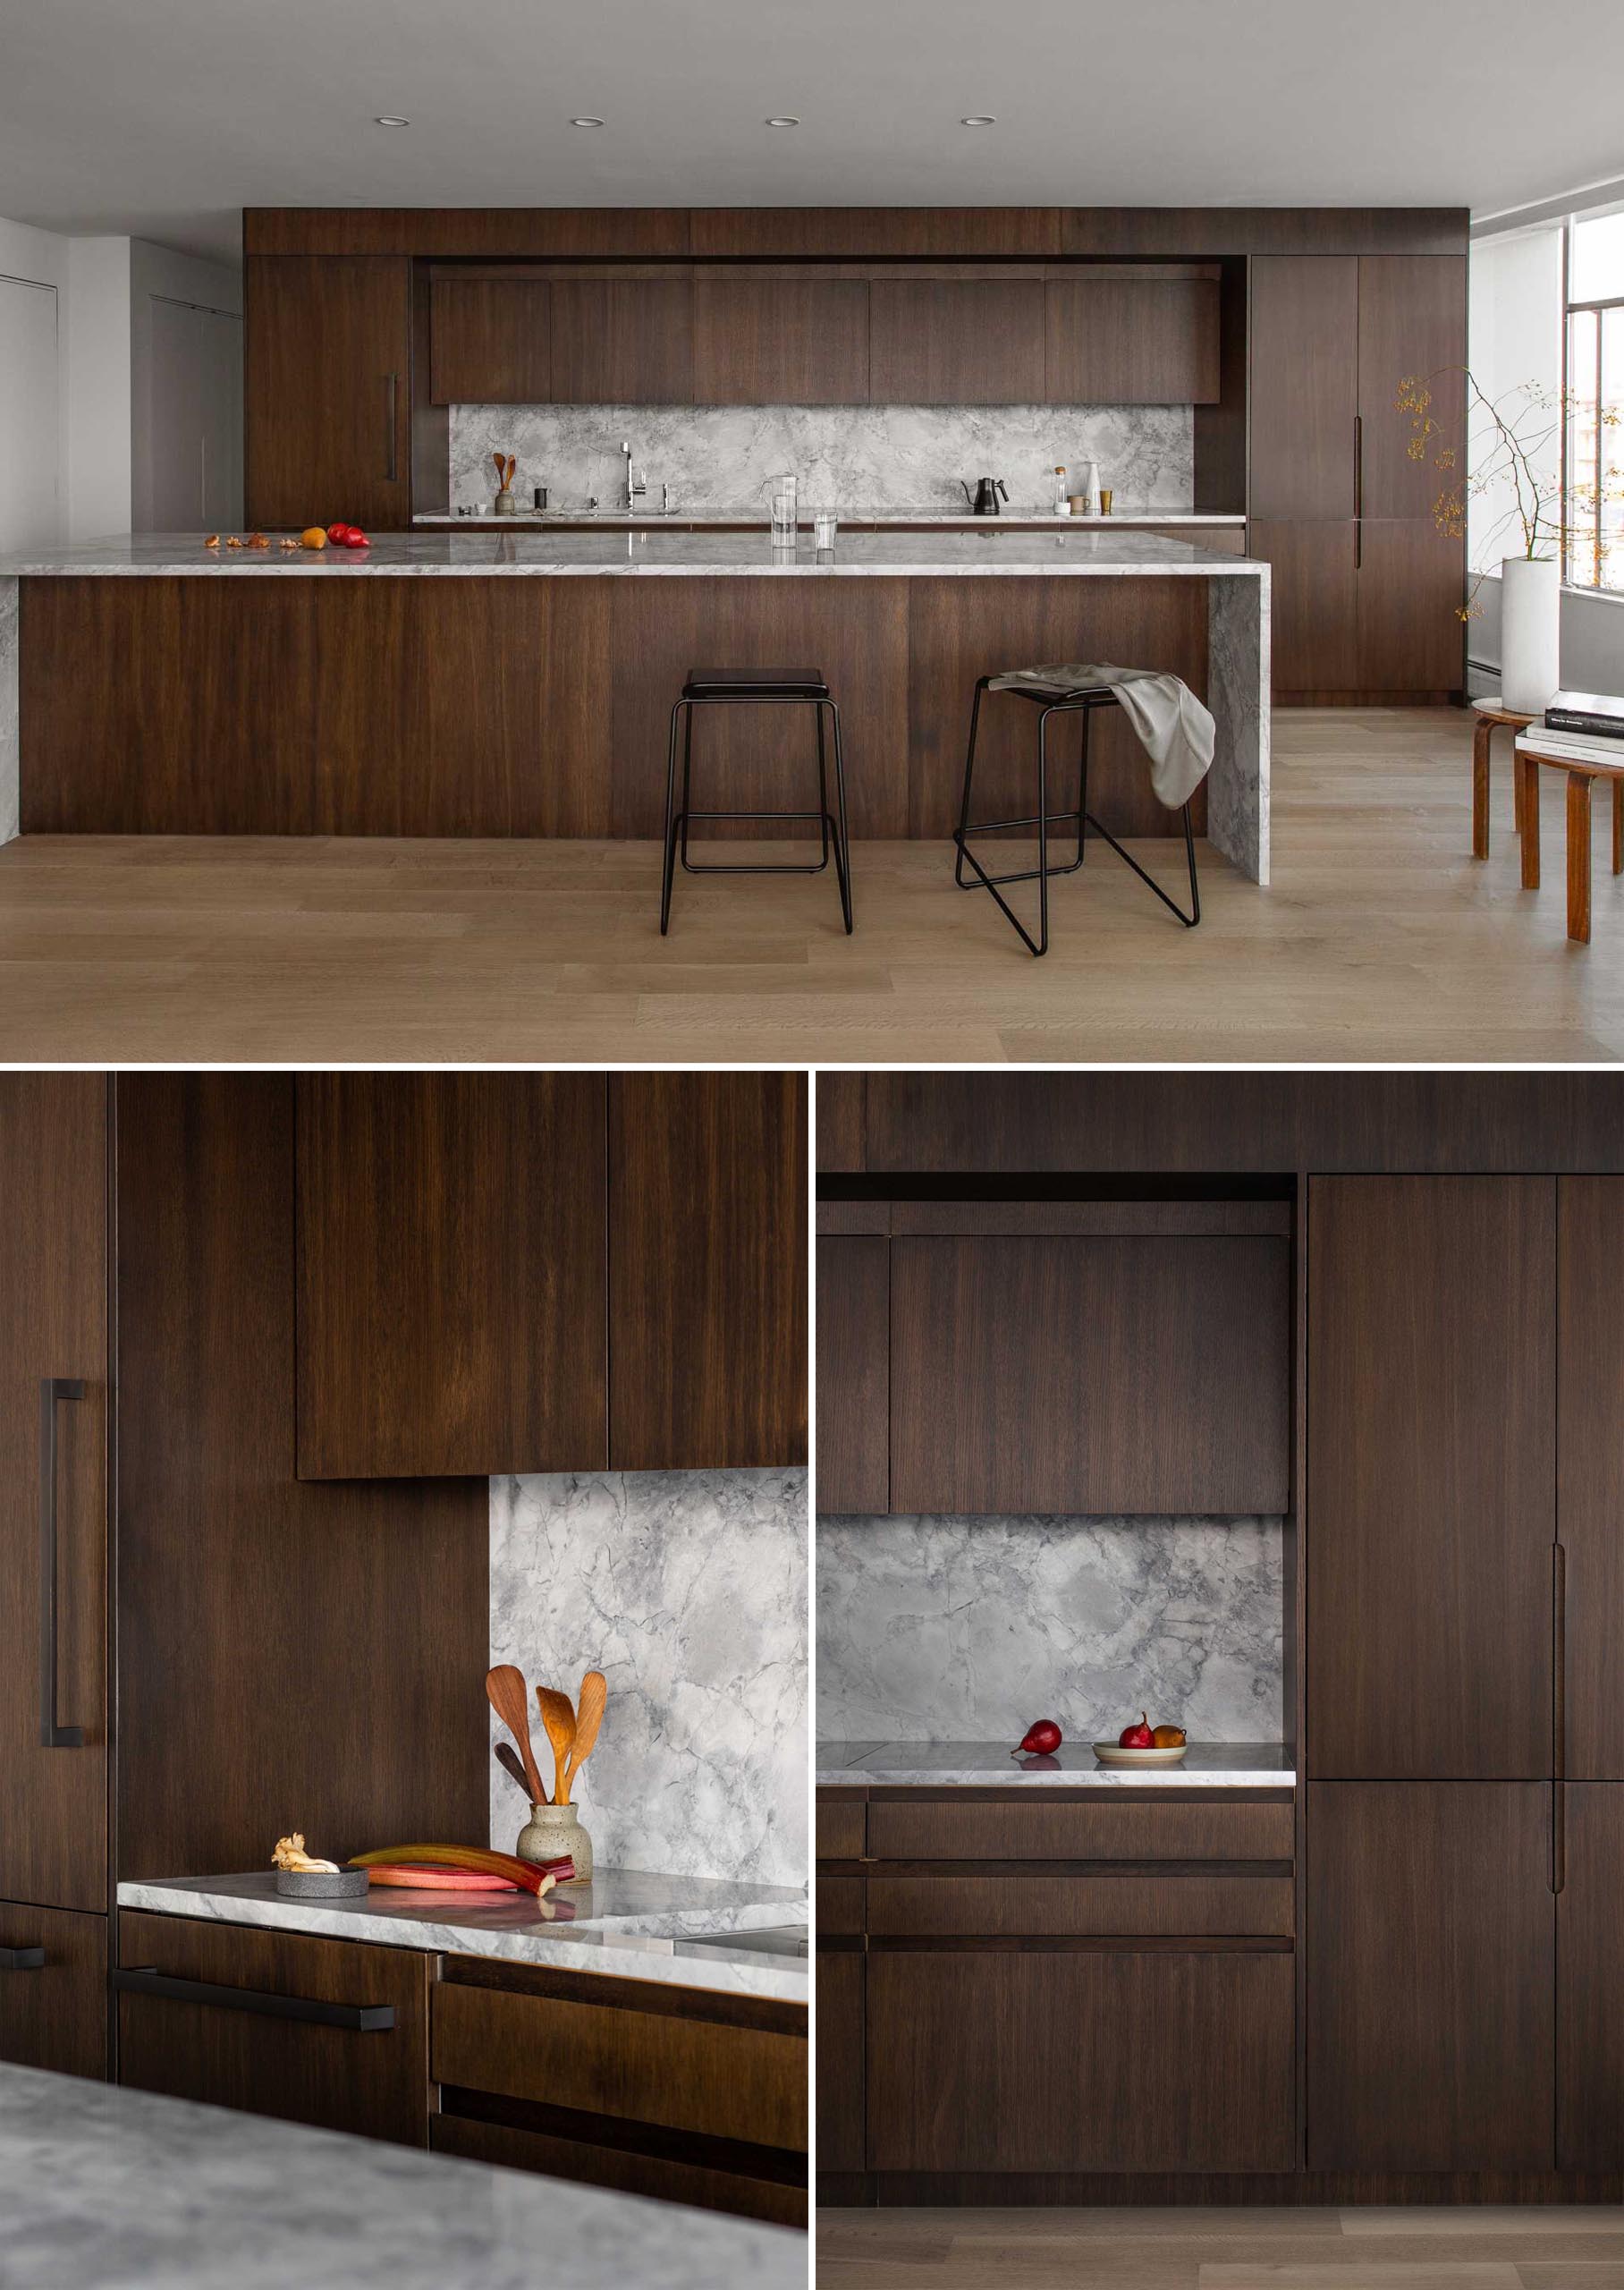 This modern dark wood kitchen includes solid panel rift sawn stained white oak panels with tactile finger pulls, giving a warm and tactile intimacy to the casework.